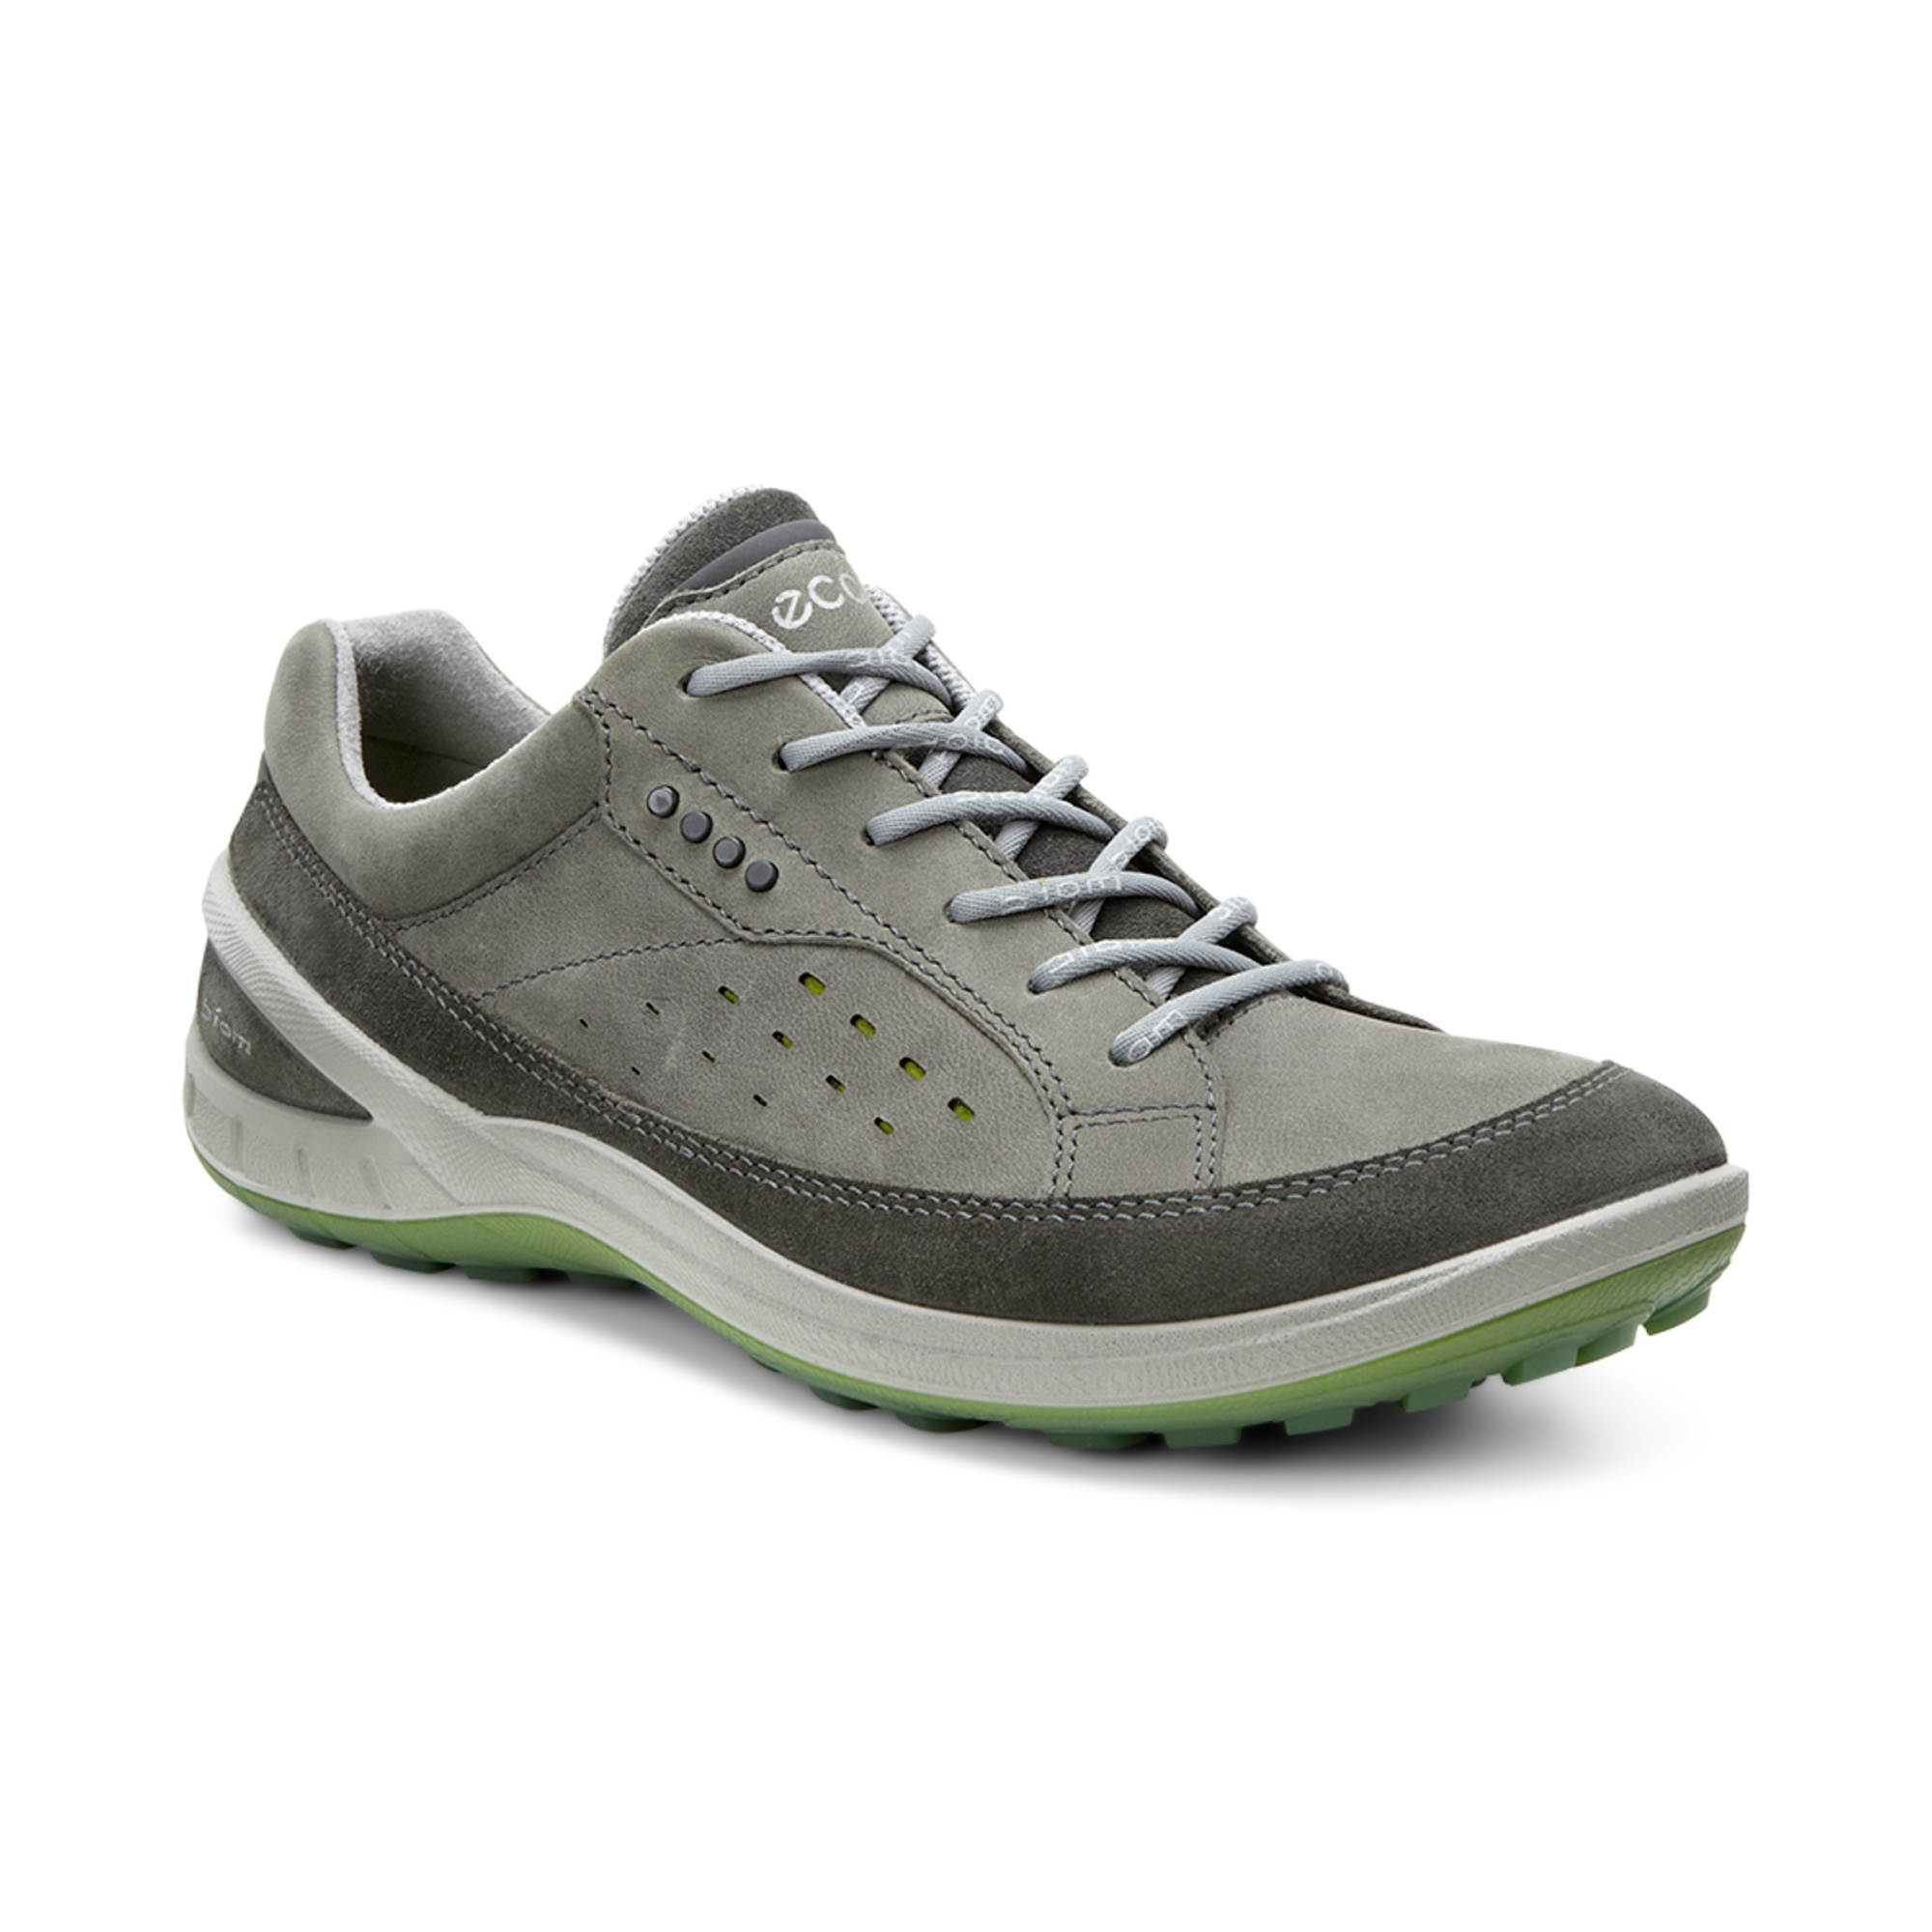 Personlig Undvigende eftertænksom Ecco Mens BIOM Grip II 44 - Products - Veryk Mall - Veryk Mall, many  product, quick response, safe your money!